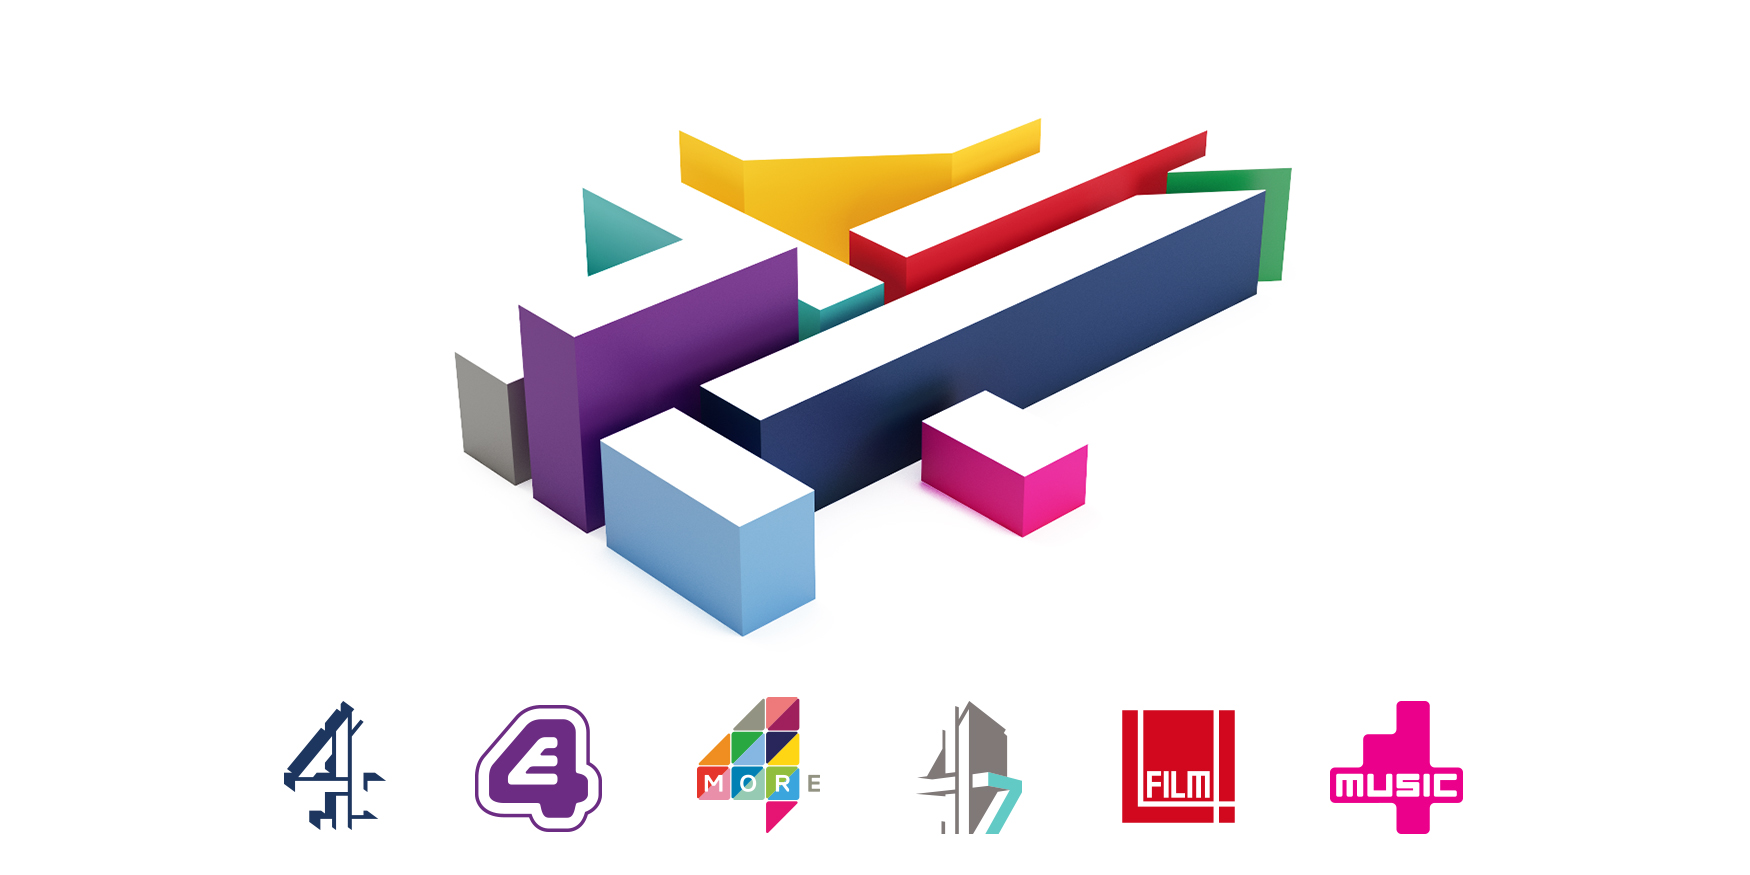 Channel 4  launches All 4 app  for Apple TV